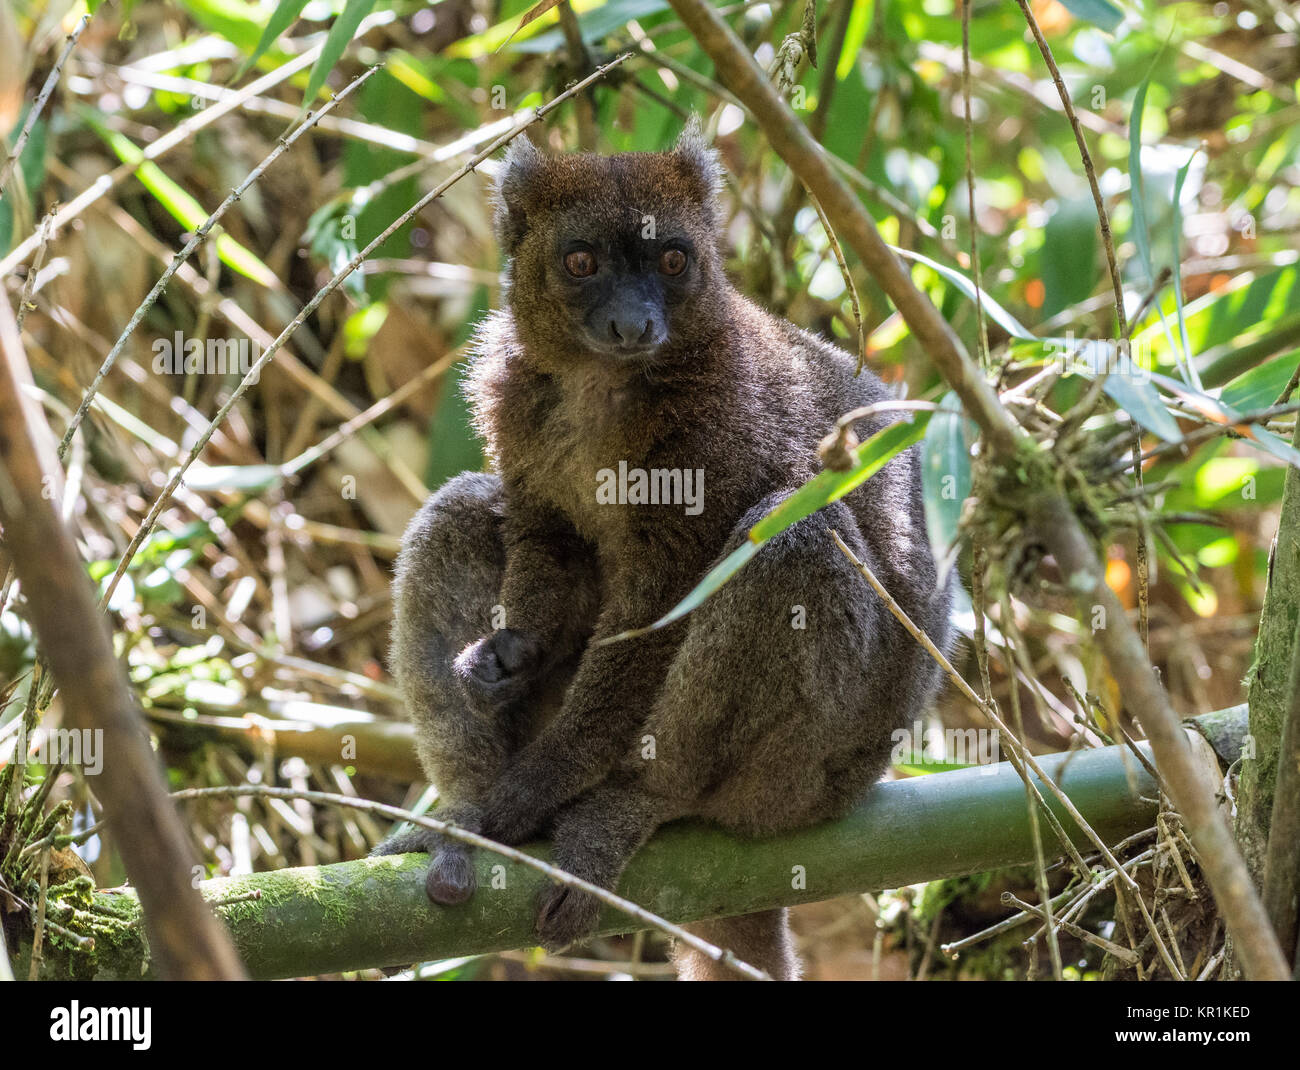 A Critically Endangered Greater Bamboo Lemur (Prolemur simus) foraging in bamboo forest. Ranomafana National Park. Madagascar, Africa. Stock Photo